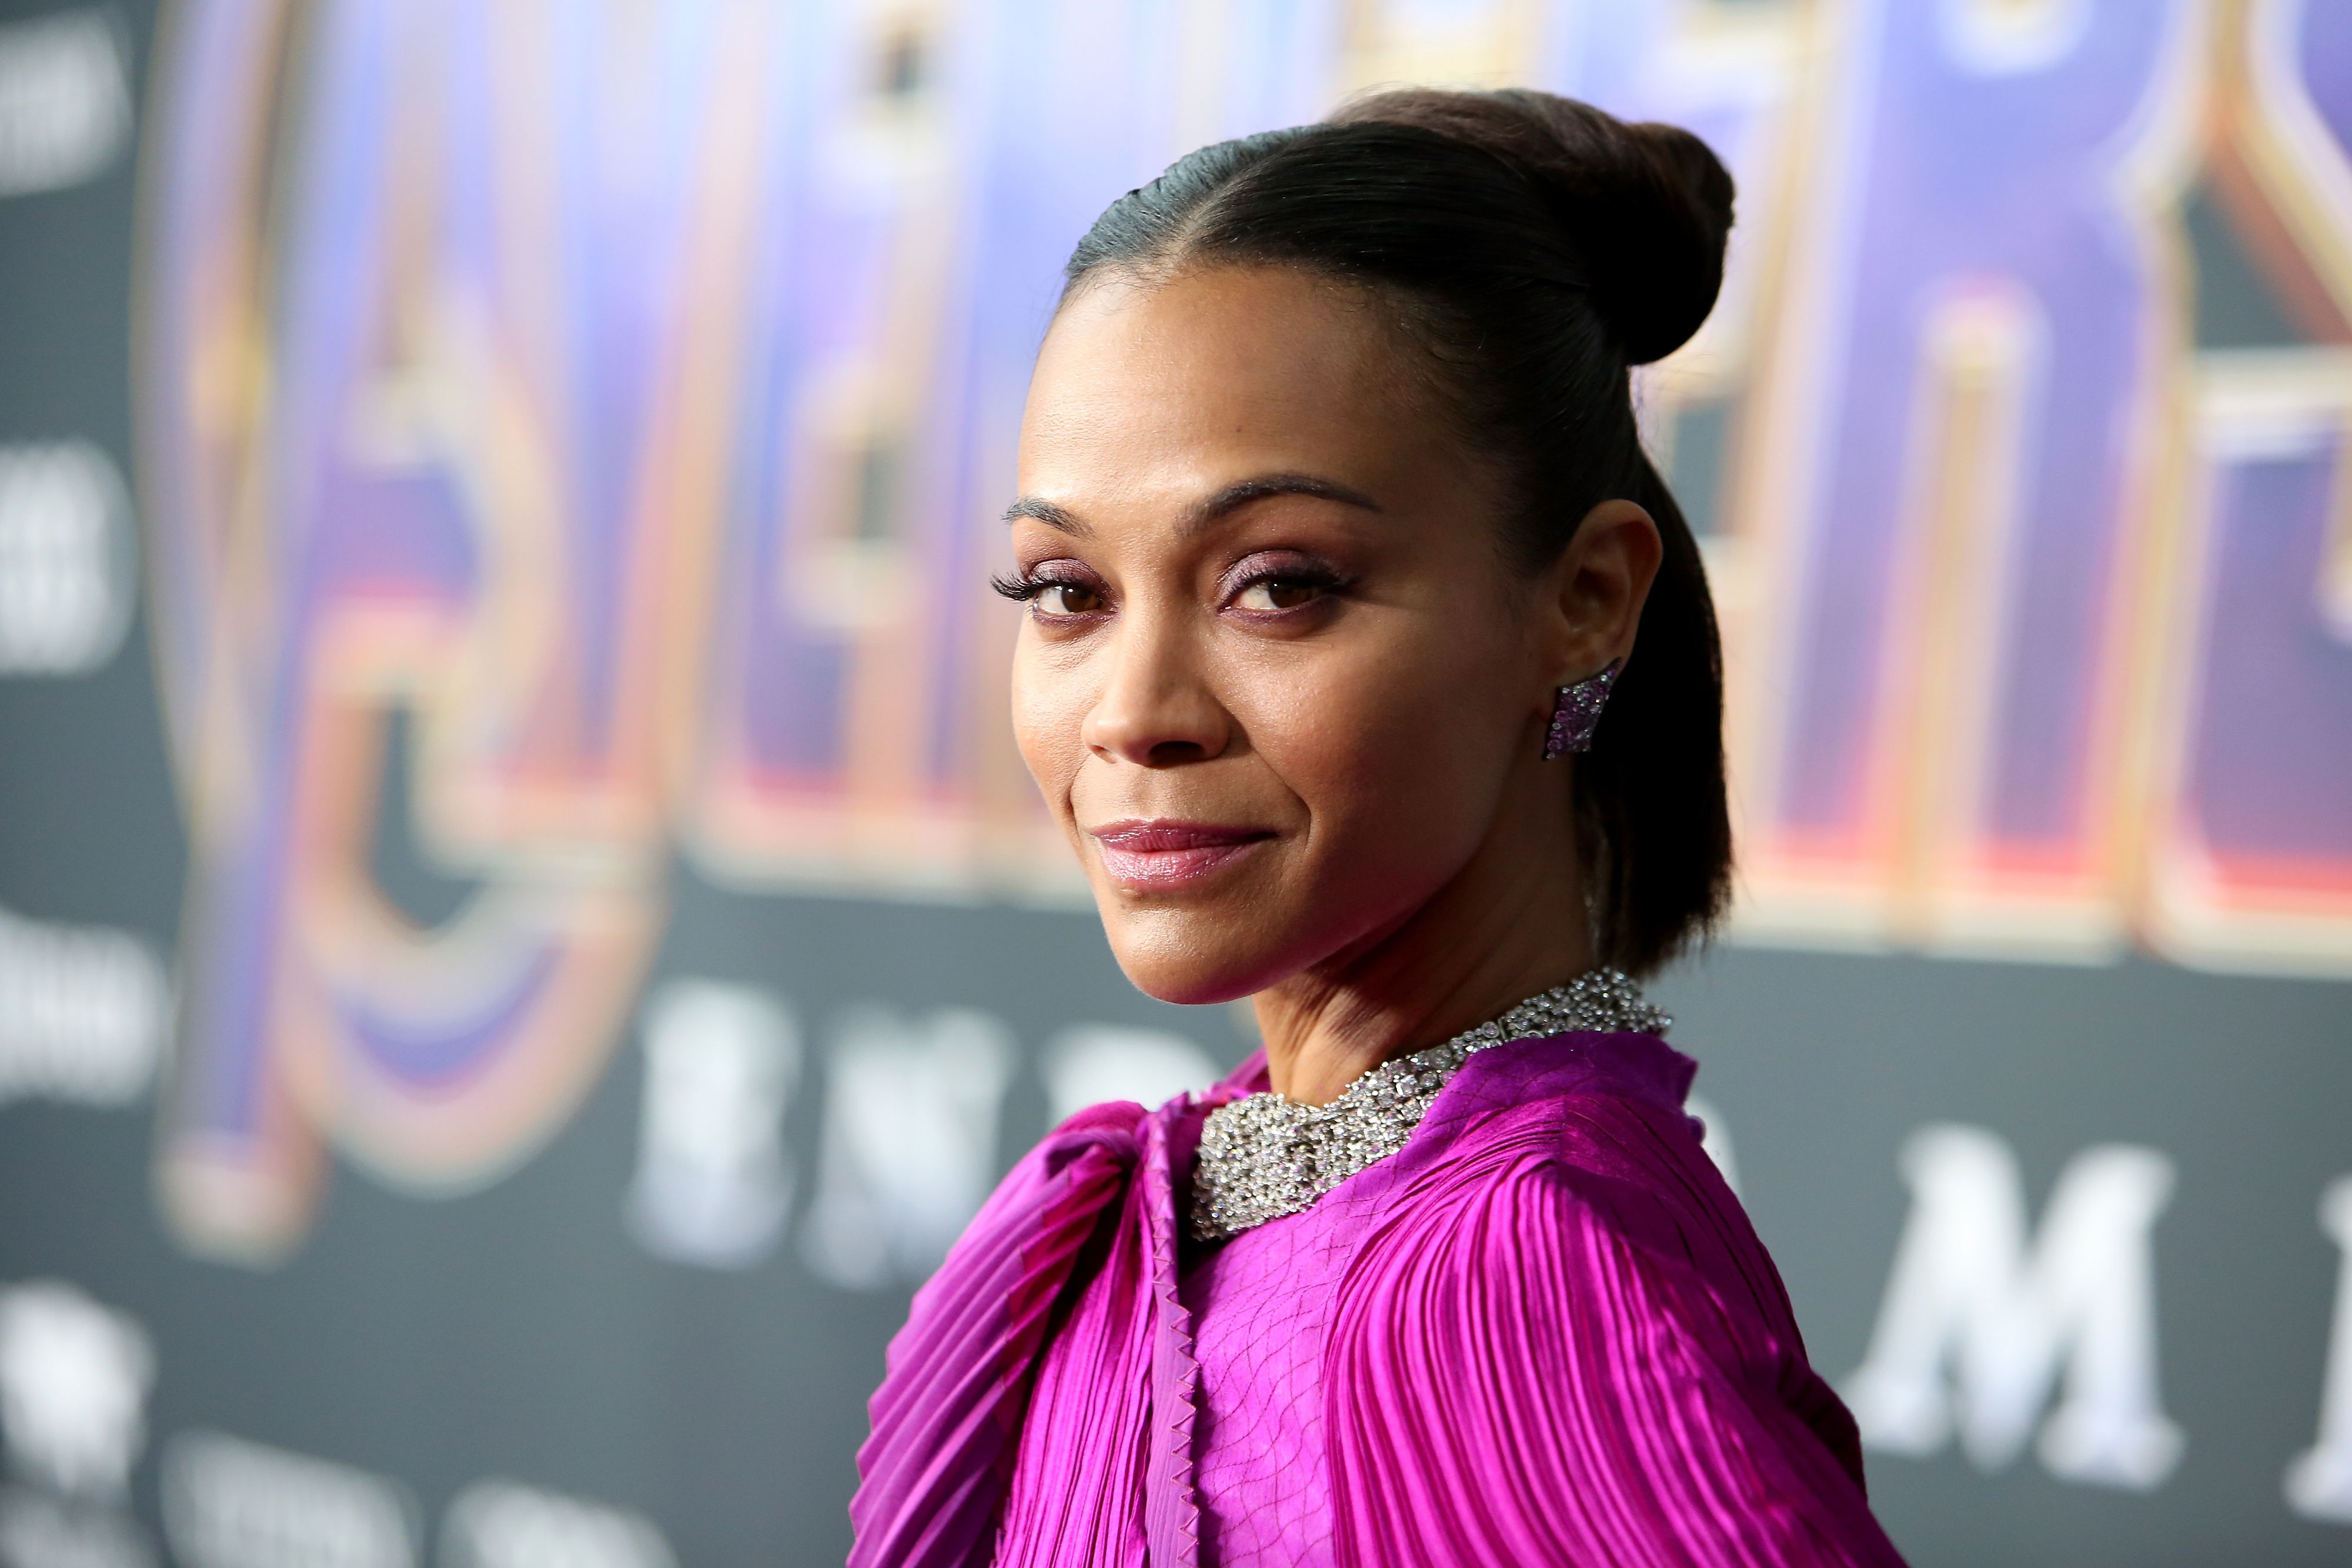 zoe Saldana Interview Building The Bese Business Being A Working Mother And Representation